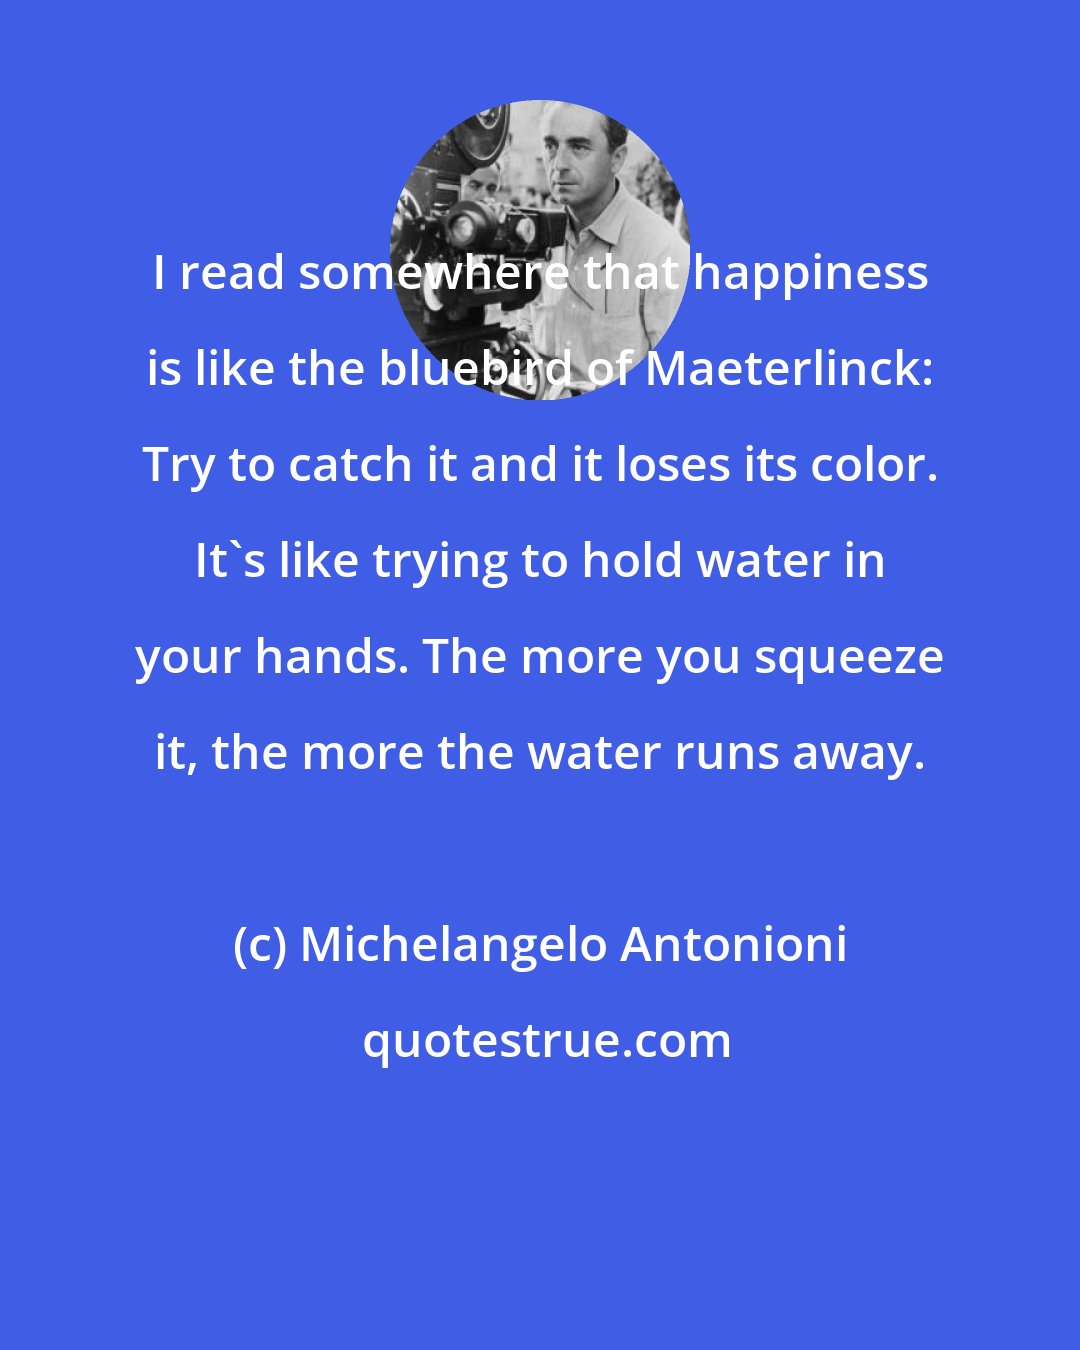 Michelangelo Antonioni: I read somewhere that happiness is like the bluebird of Maeterlinck: Try to catch it and it loses its color. It's like trying to hold water in your hands. The more you squeeze it, the more the water runs away.